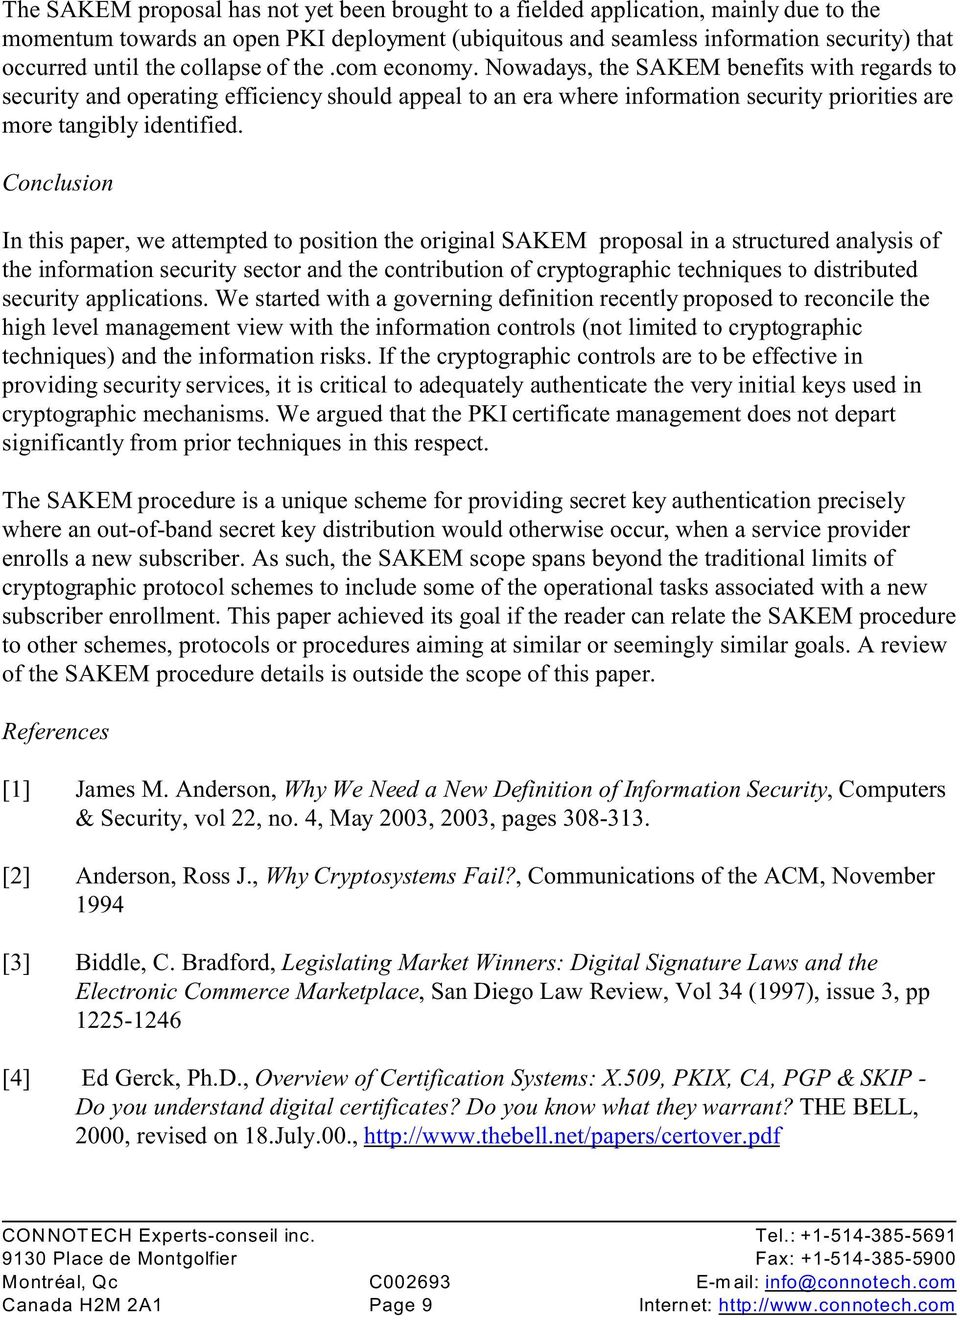 Conclusion In this paper, we attempted to position the original SAKEM proposal in a structured analysis of the information security sector and the contribution of cryptographic techniques to